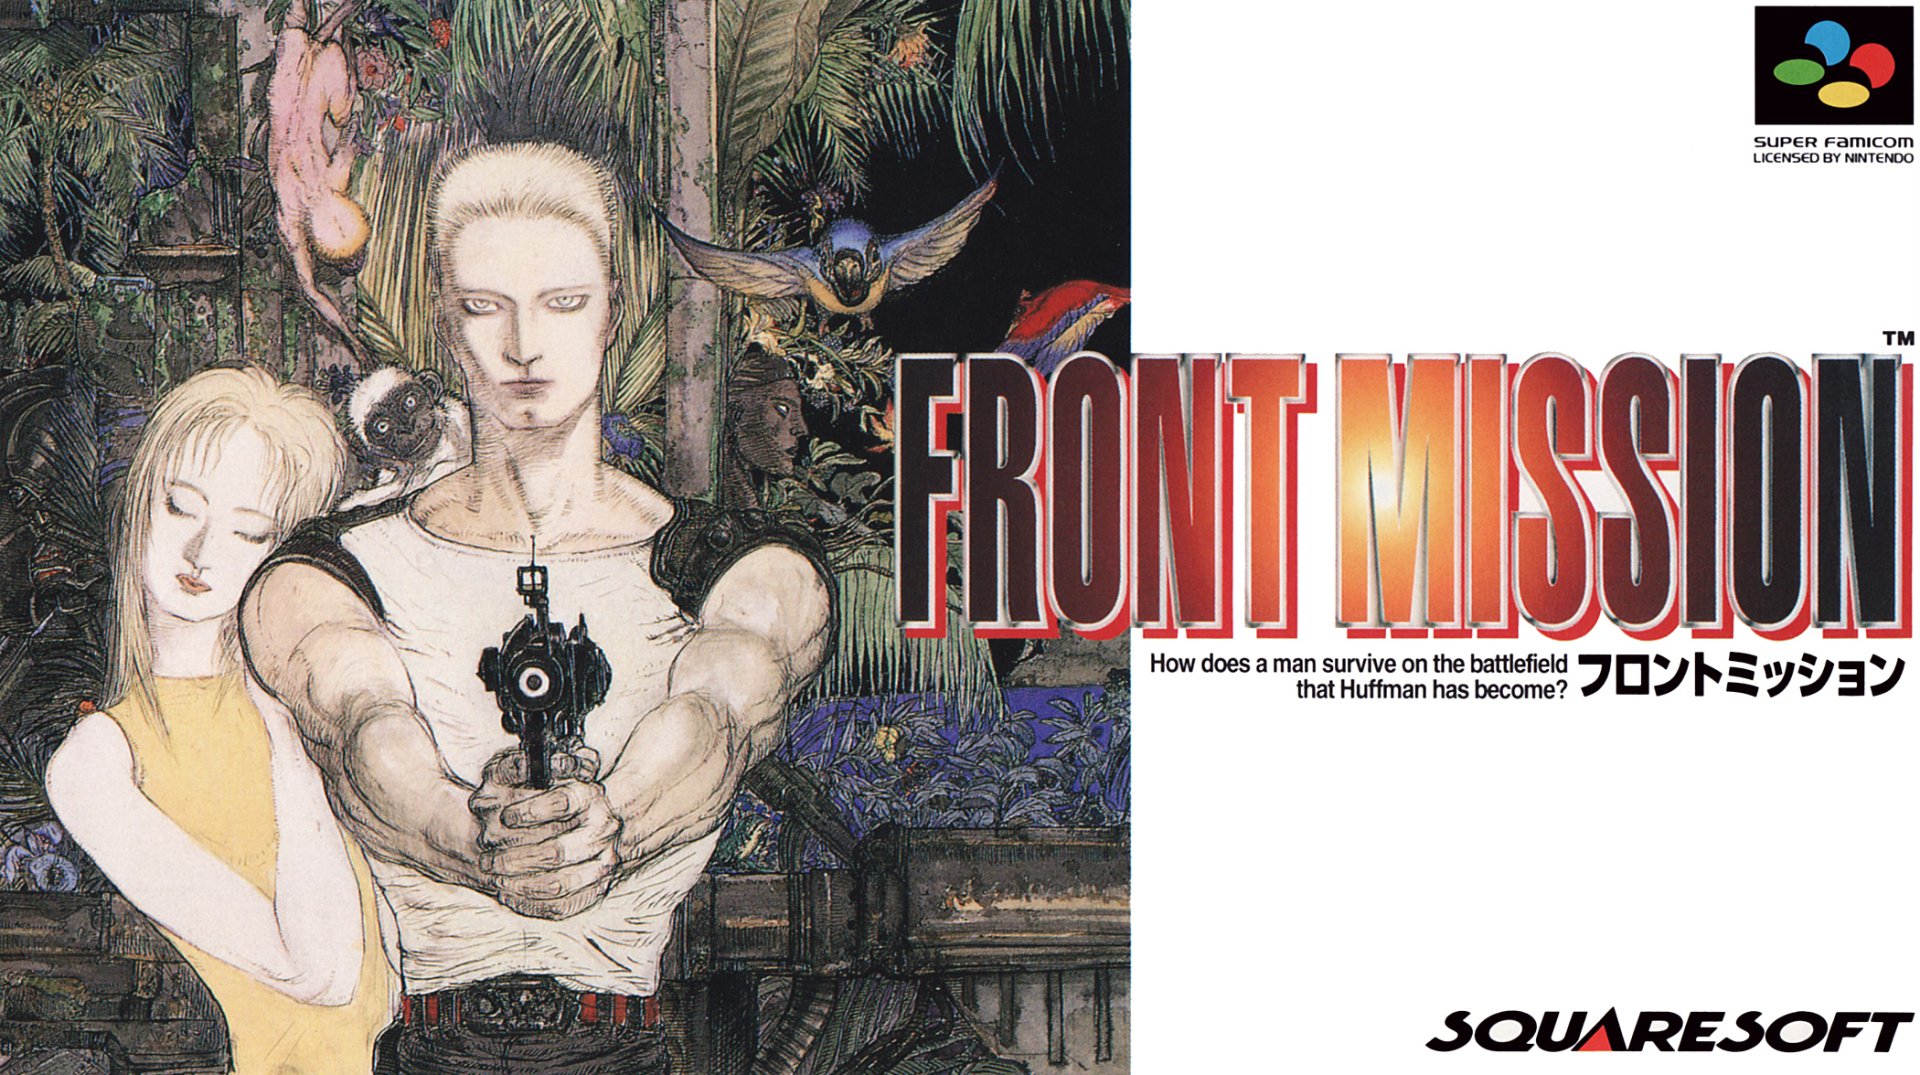 download the new version FRONT MISSION 1st: Remake